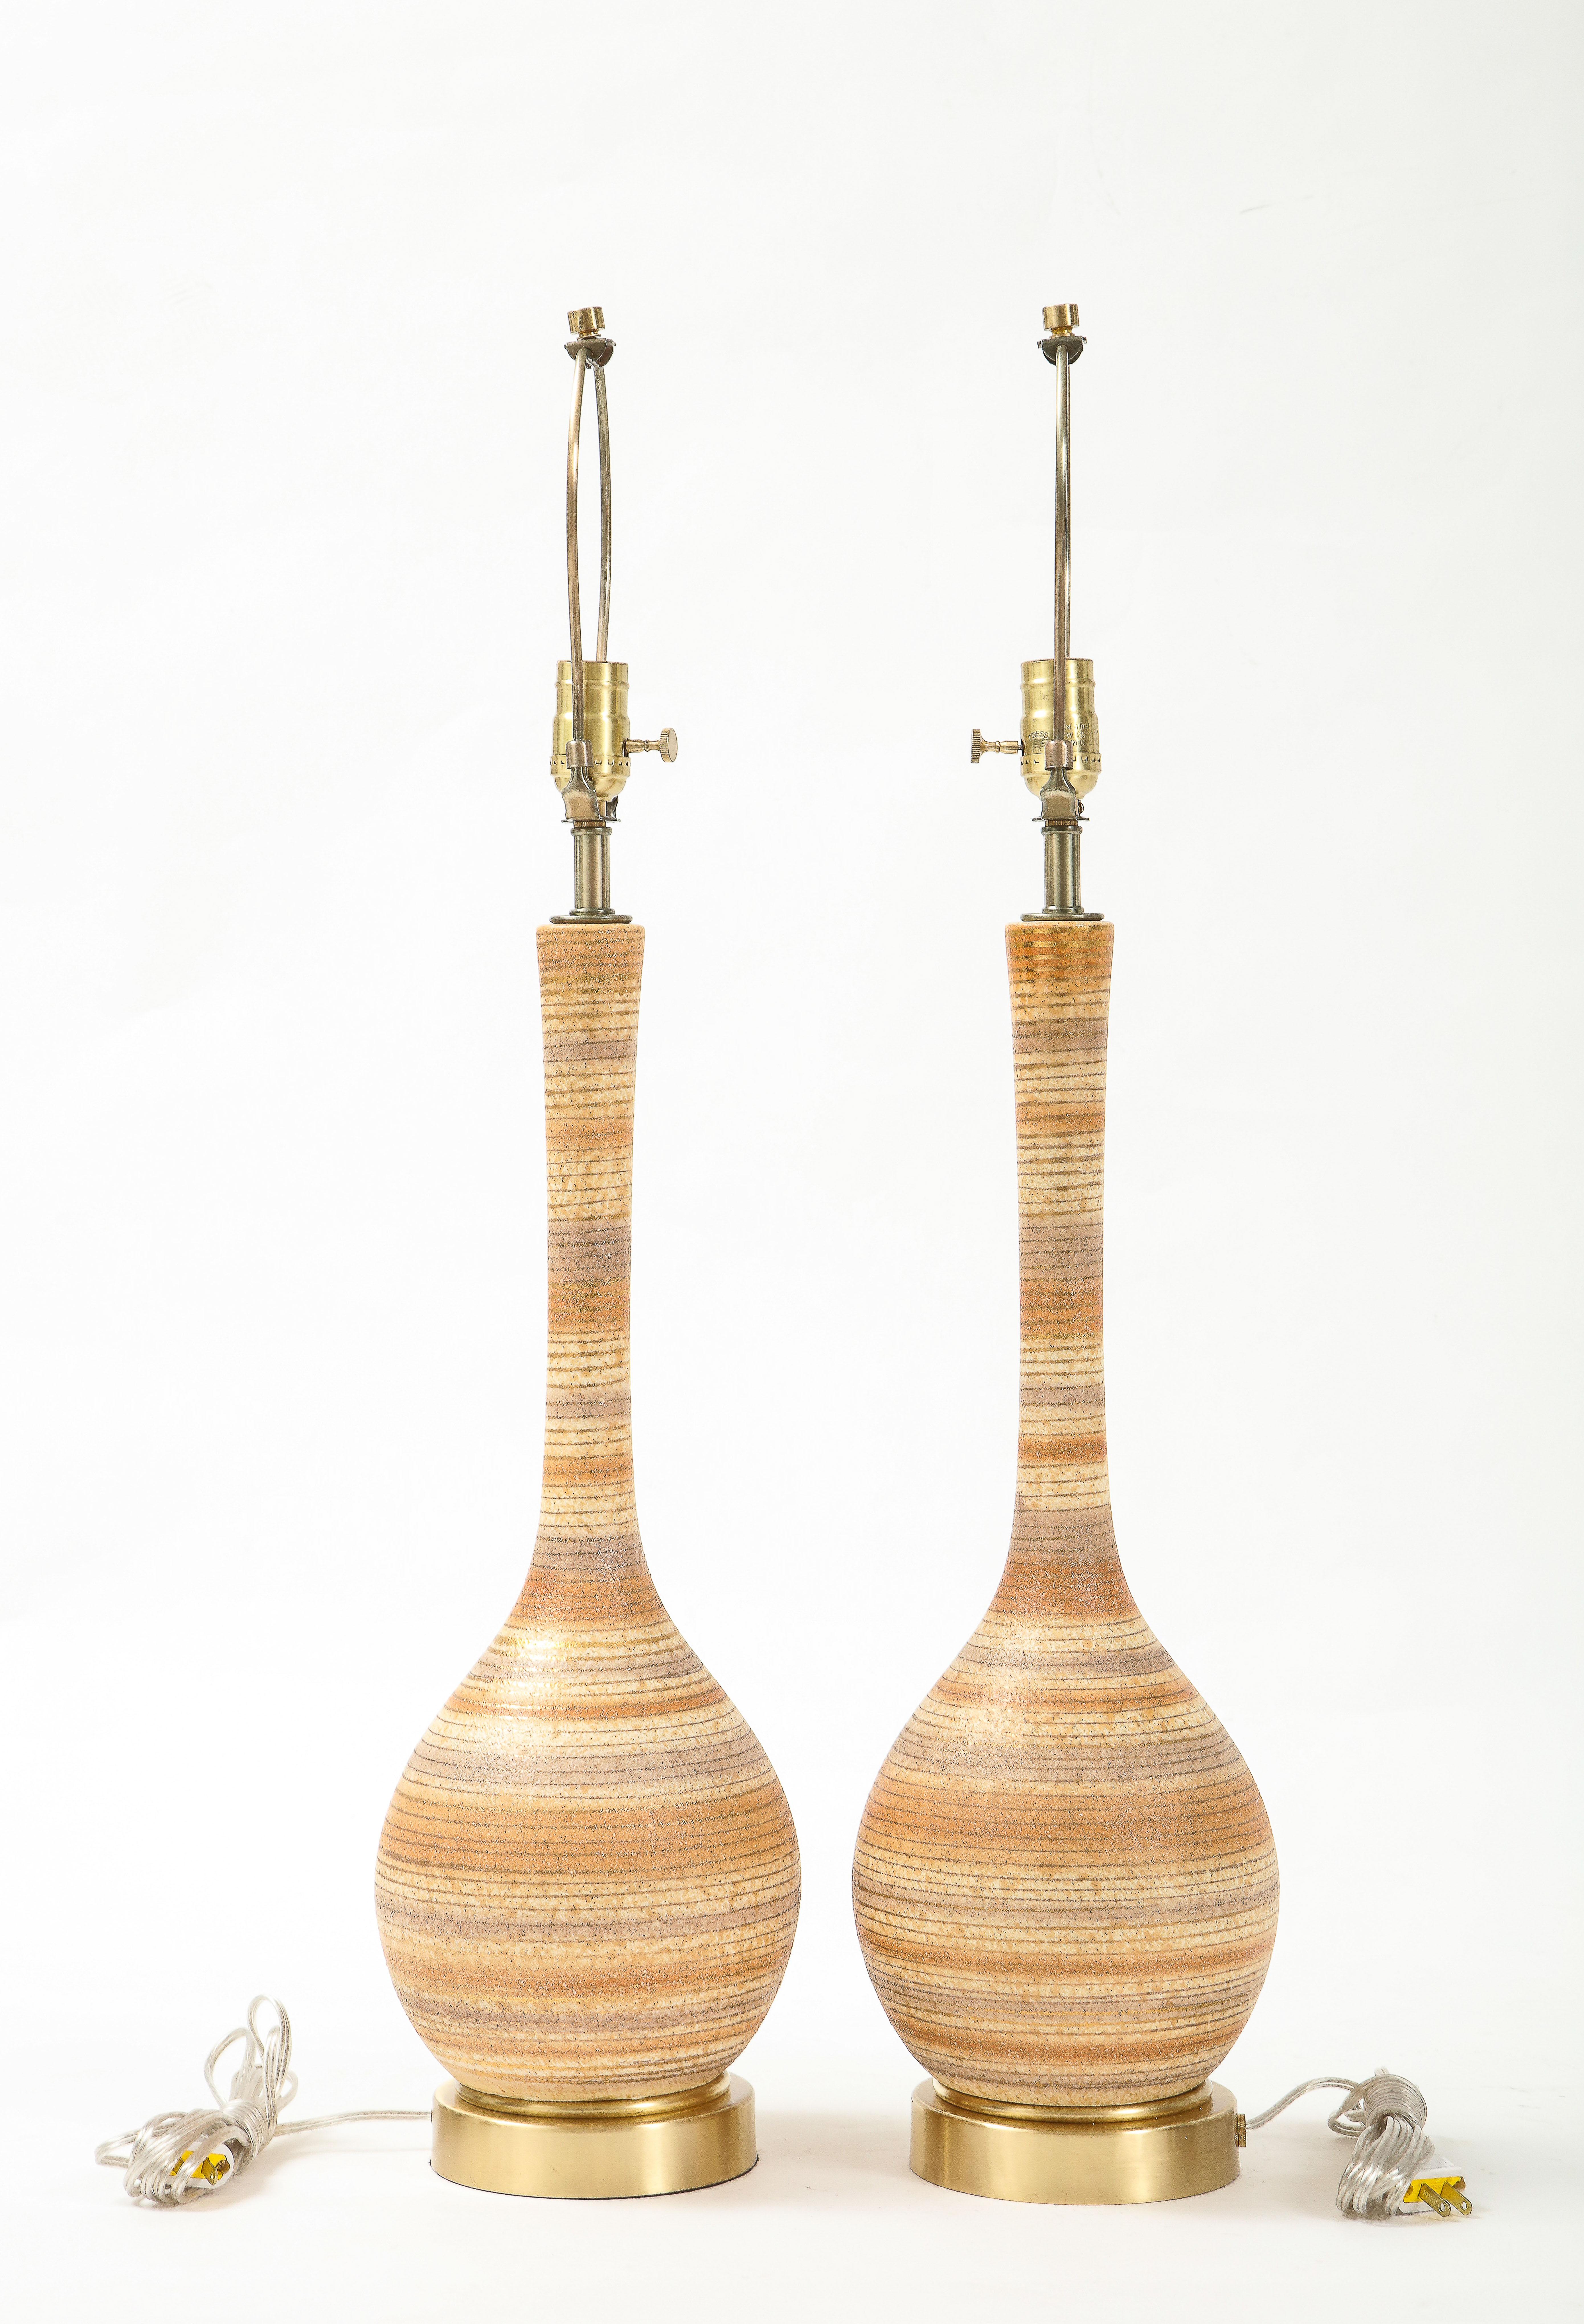 Pair of mid century ceramic lamps featuring muted tones of beige, gray and tan with a gold metallic stripe. Lamps sit on brushed brass disc bases. Rewired for use in the USA, 100W max.